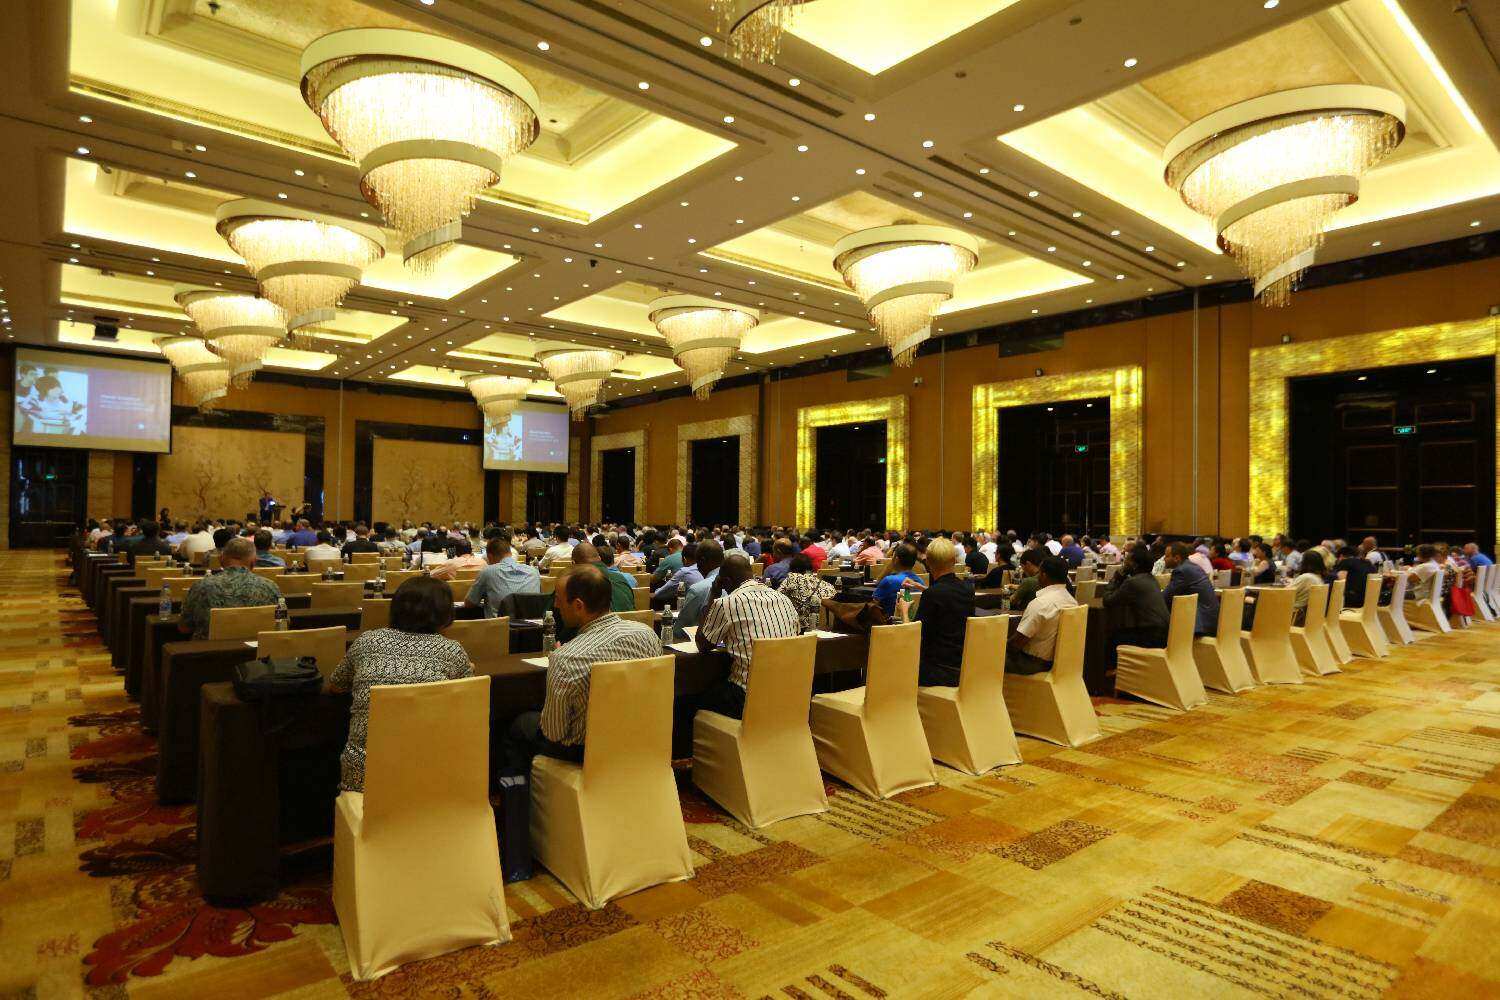 Attendees at Dipont's annual conference in Wuxi